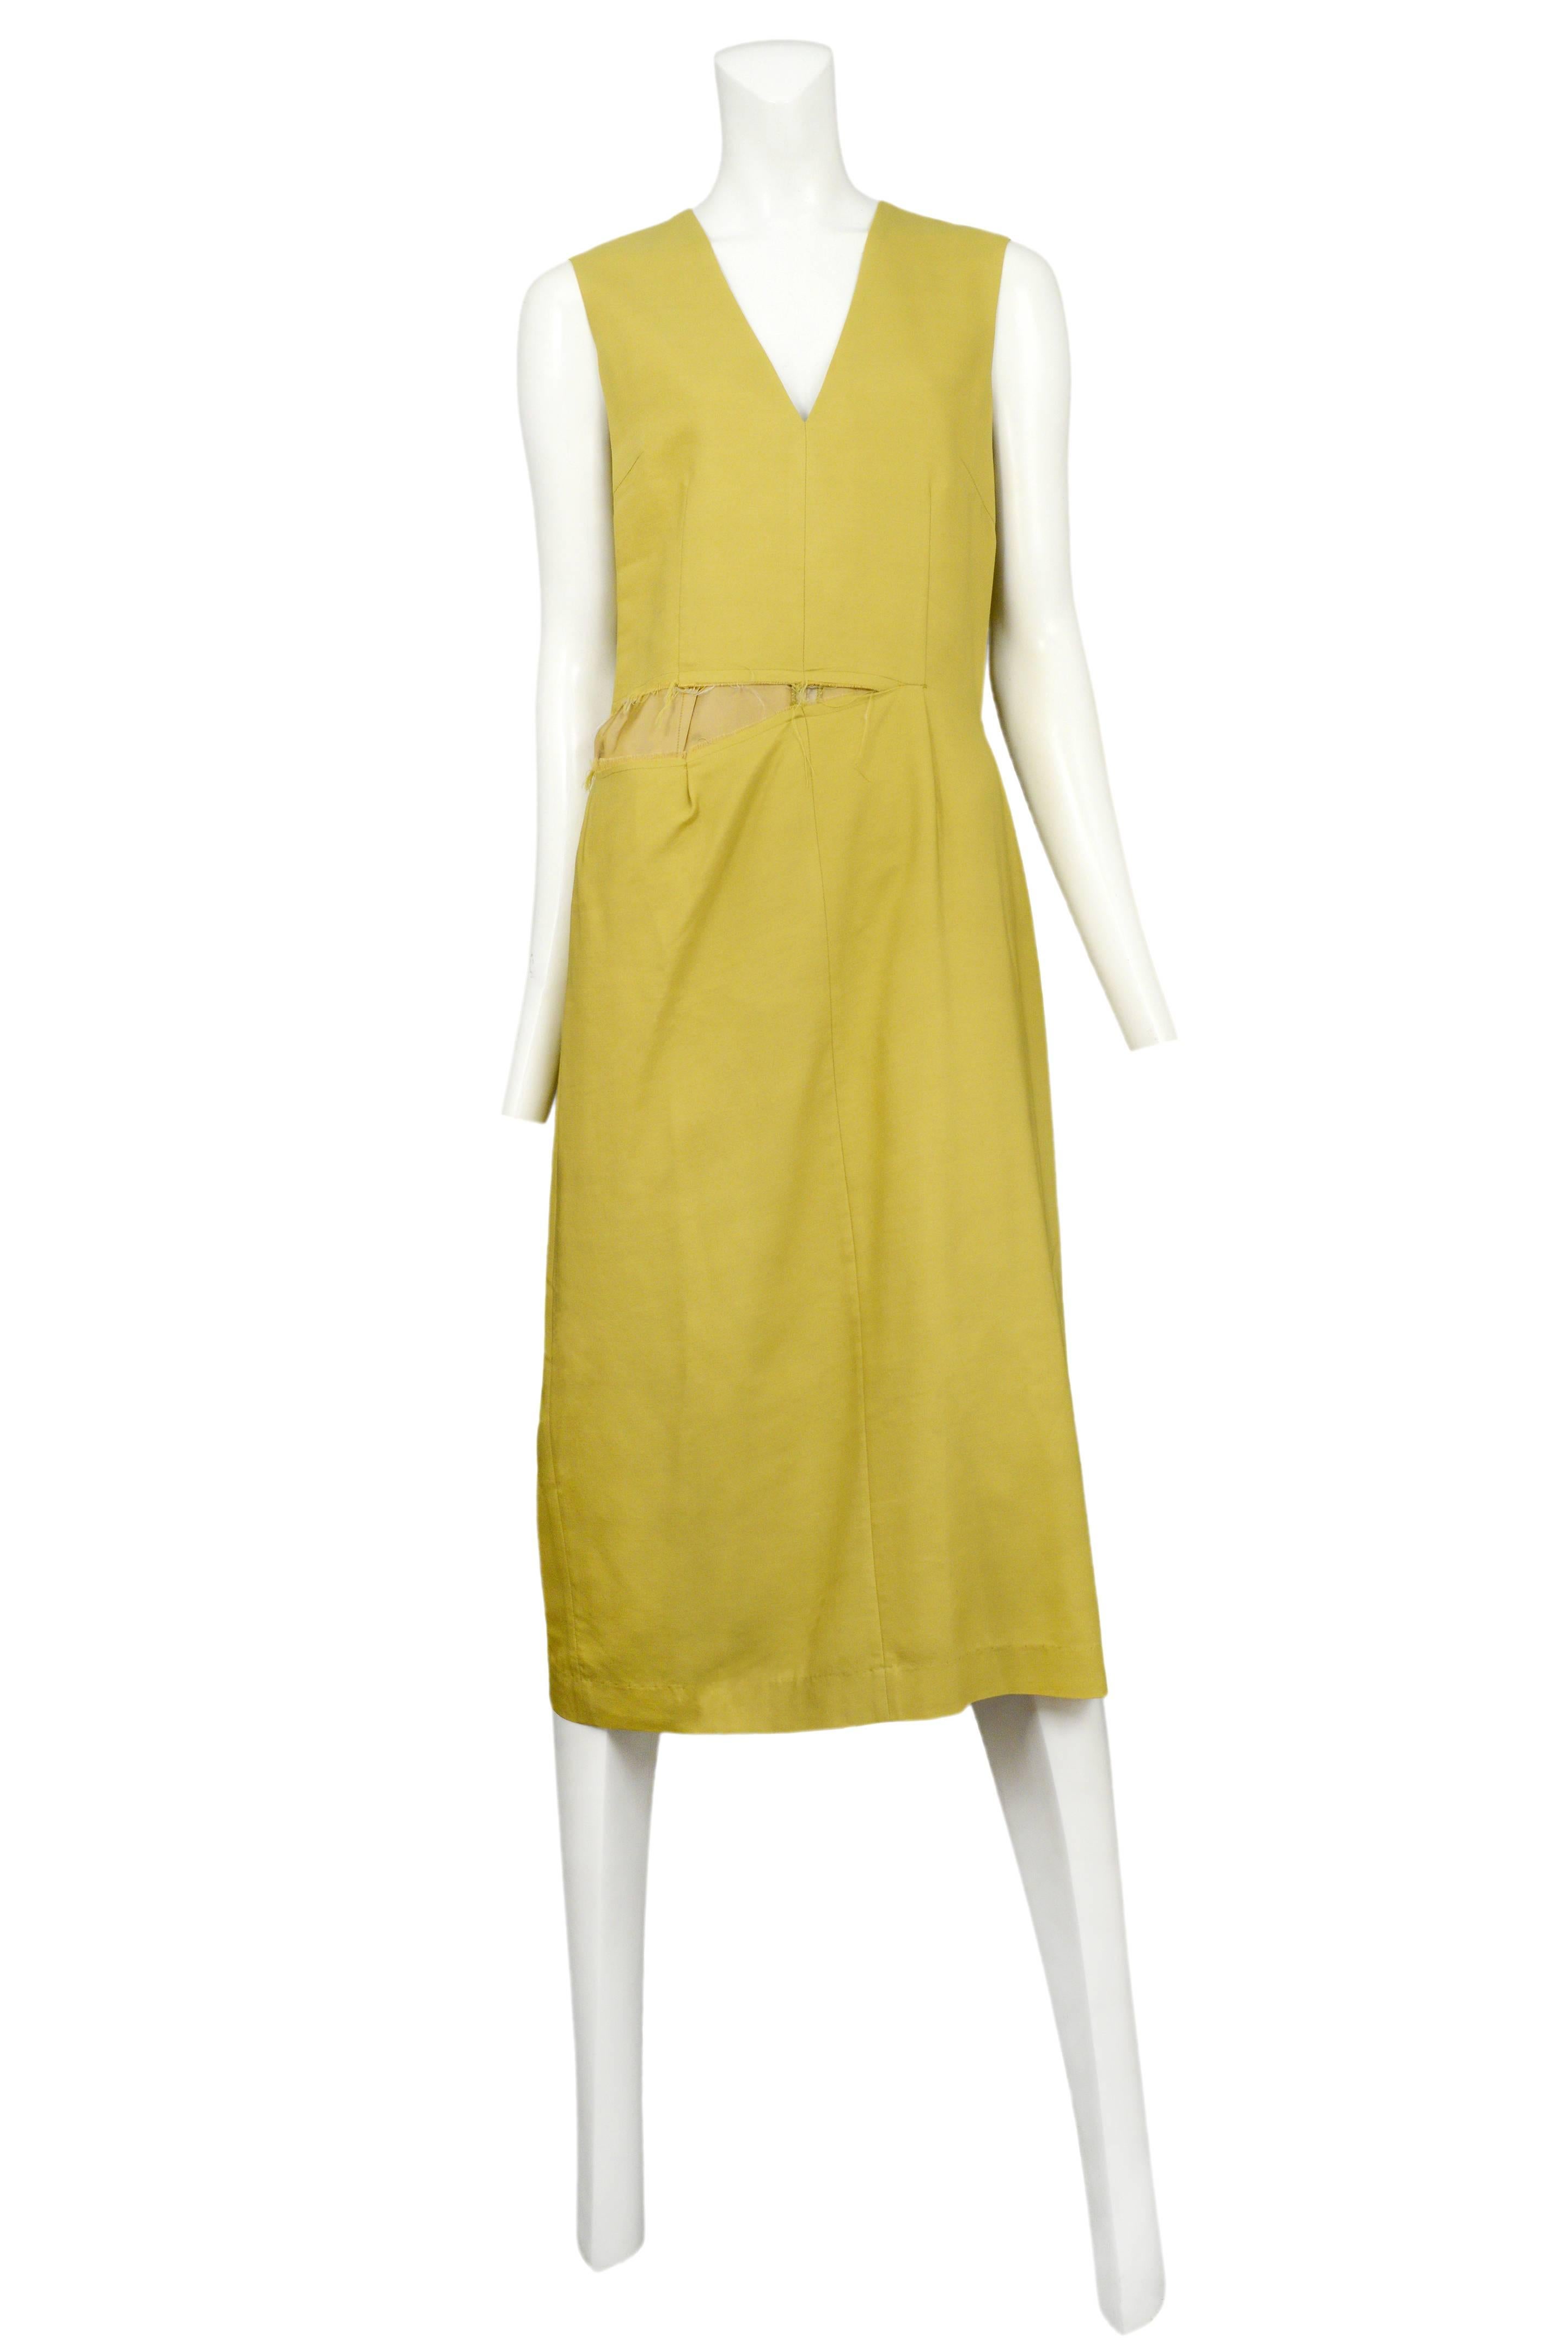 Vintage Maison Martin Margiela mustard yellow sleeveless below the knee dress featuring an intentionally ripped seam at the waistline, a v-neckline and a back vent at the skirt. Circa Autumn / Winter 2003.
Please inquire for additional images.